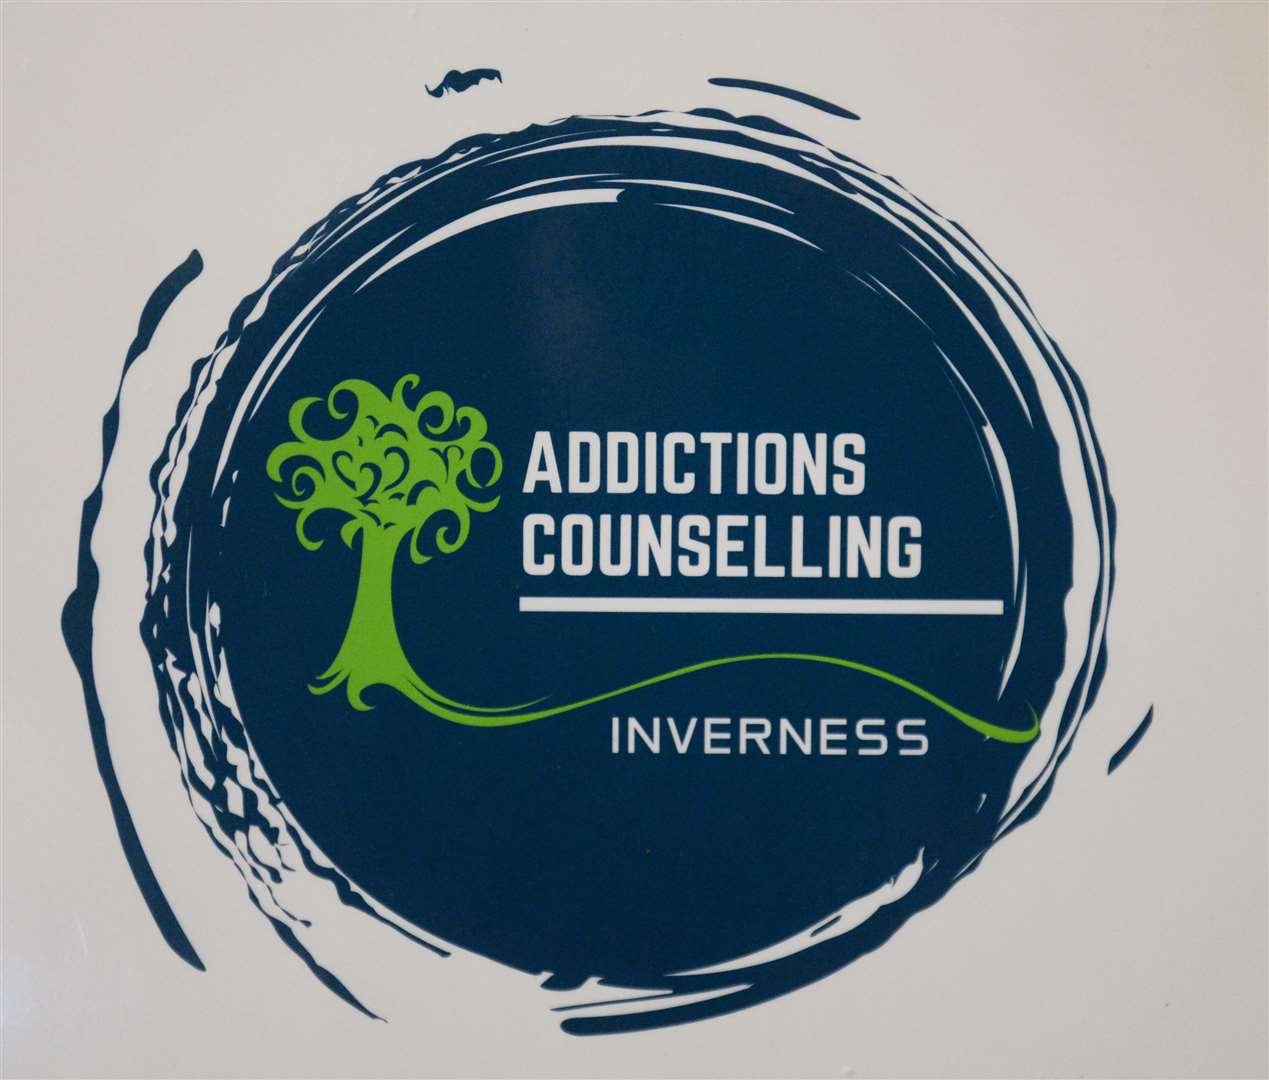 Addictions Counselling Inverness provides a free counselling service to individuals affected by the alcohol use of a close family member.